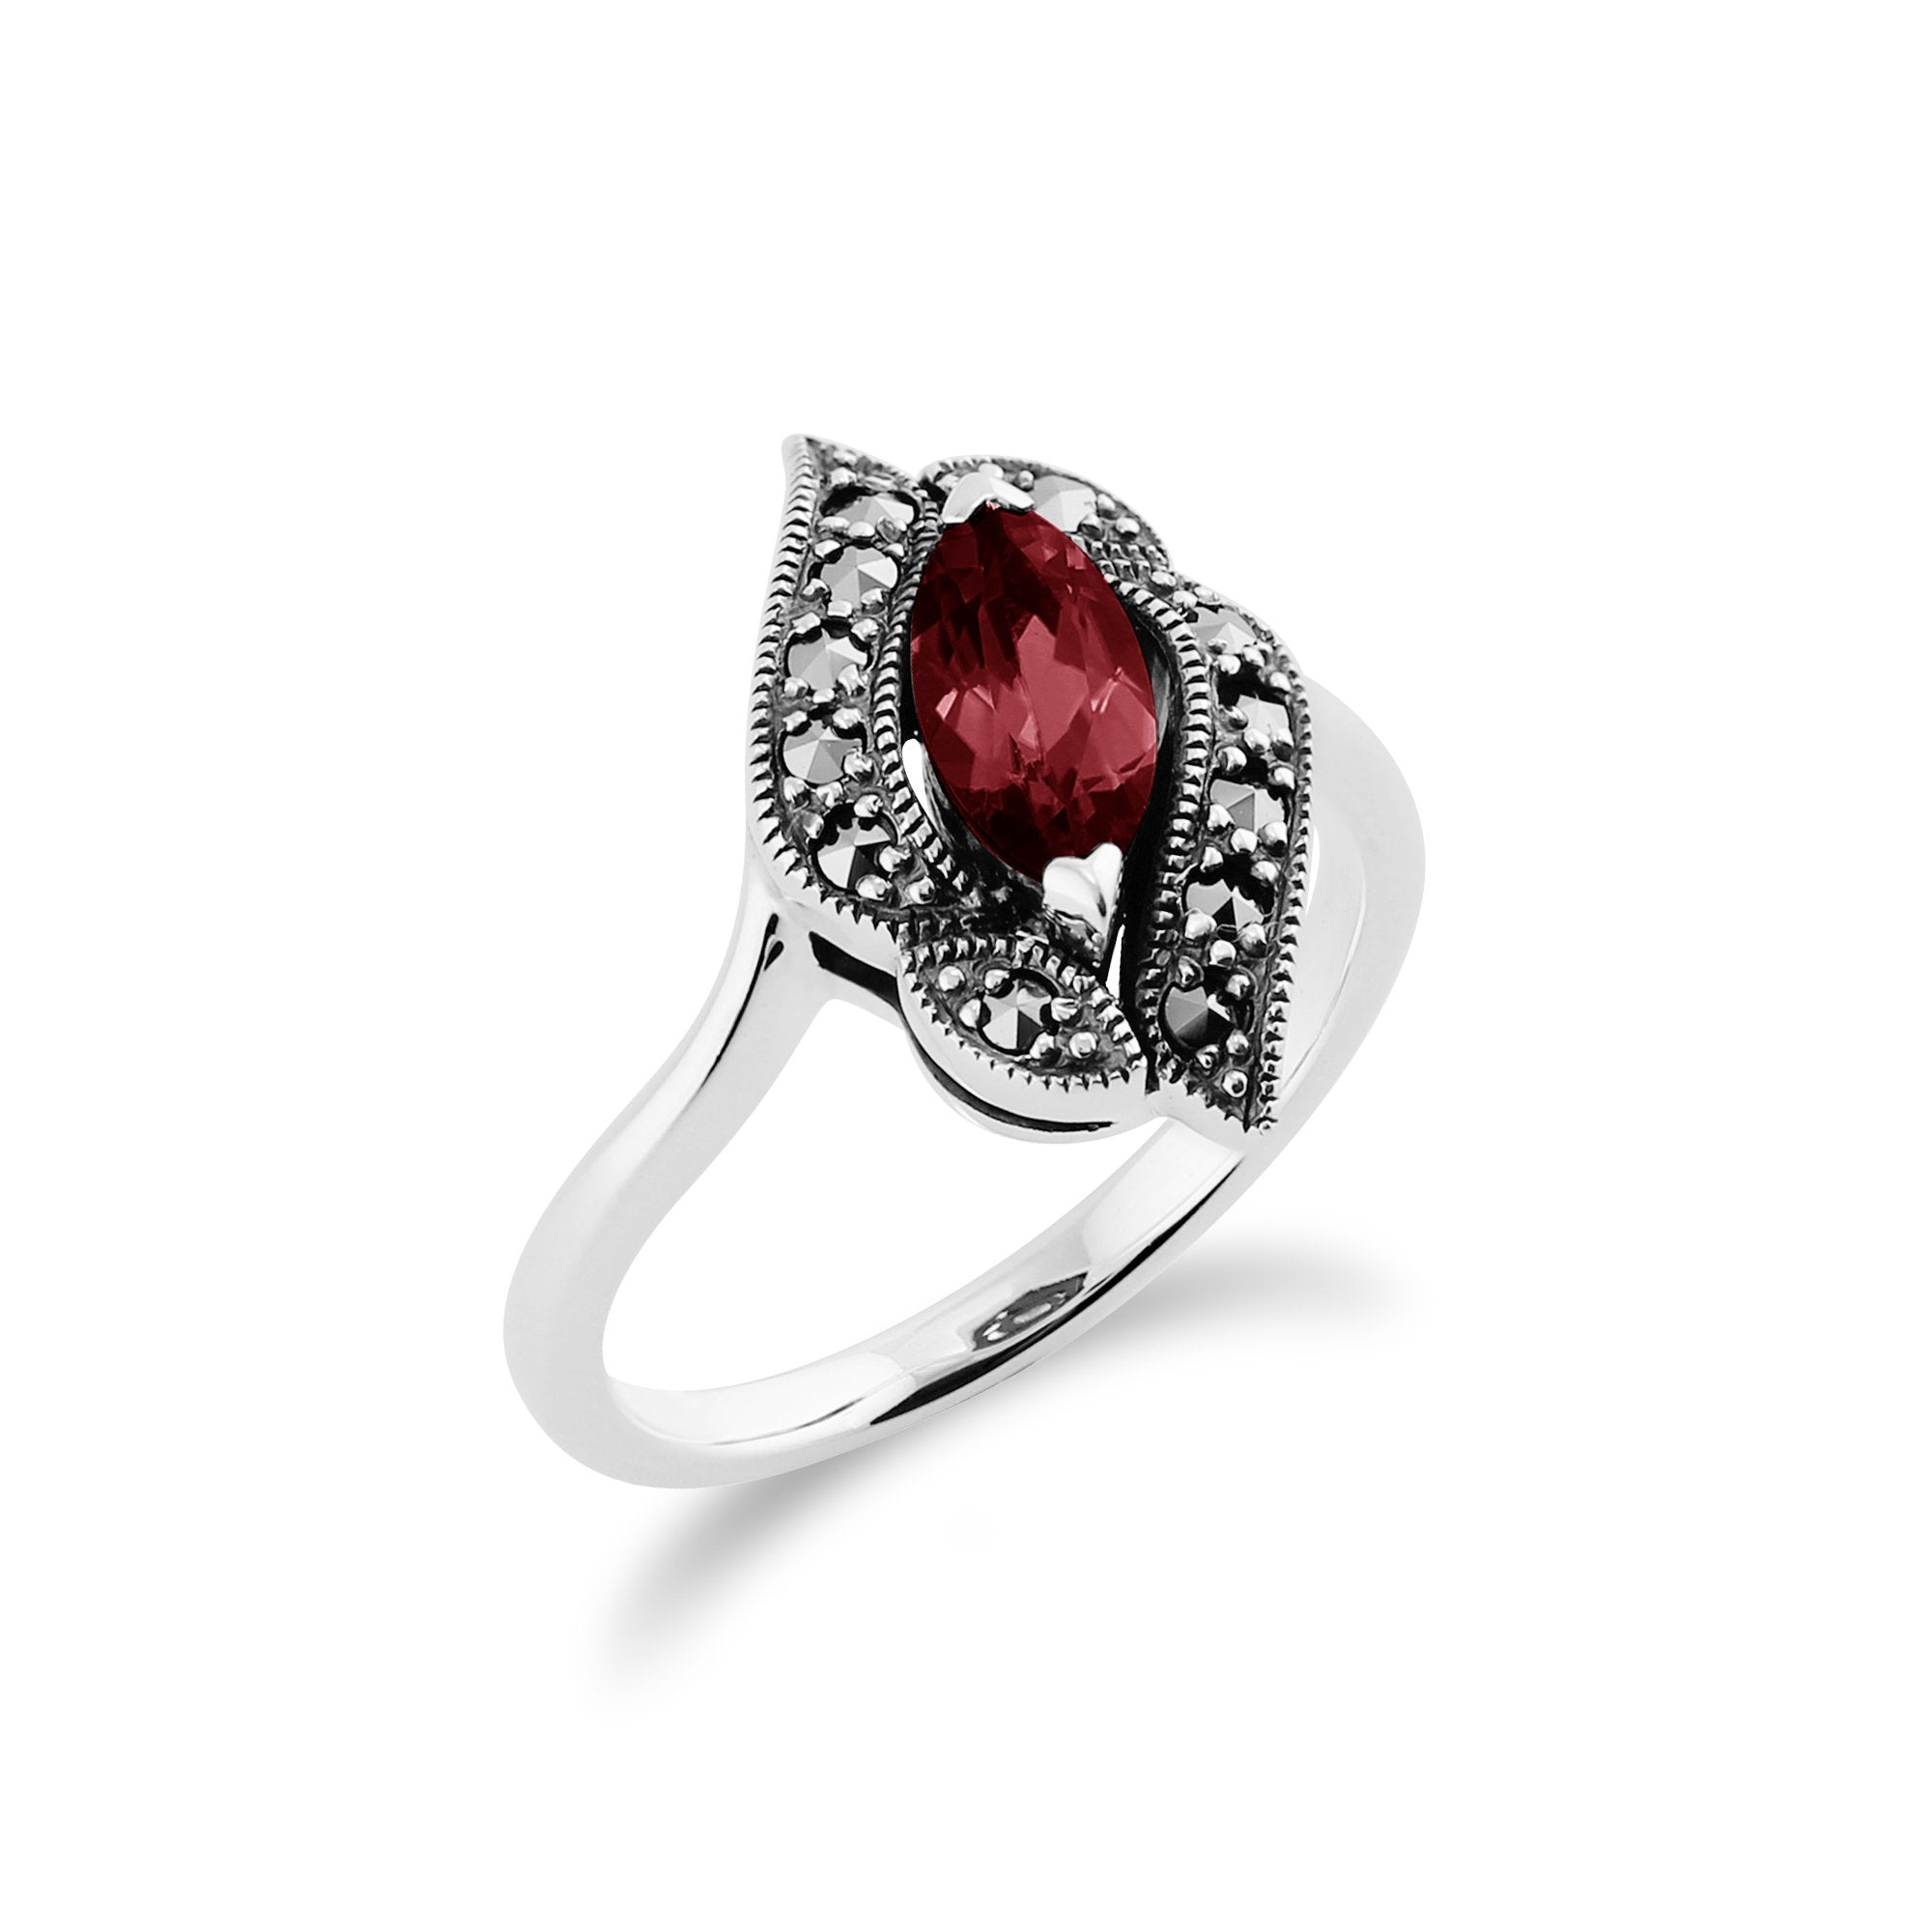 Art Nouveau Style Marquise Garnet & Marcasite Ring in 925 Sterling Silver